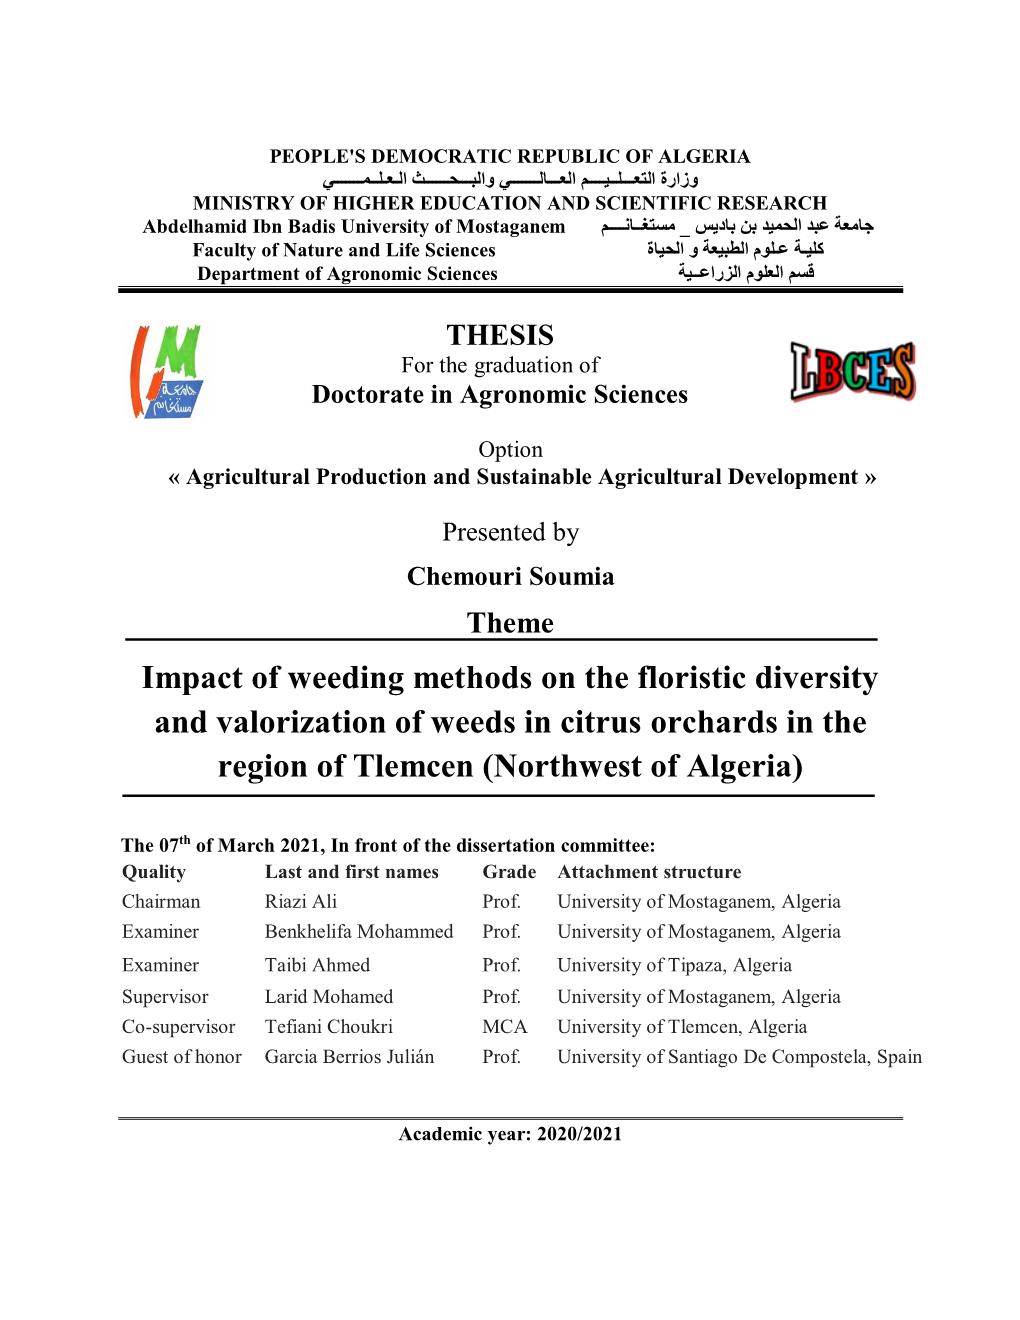 Impact of Weeding Methods on the Floristic Diversity and Valorization of Weeds in Citrus Orchards in the Region of Tlemcen (Northwest of Algeria)